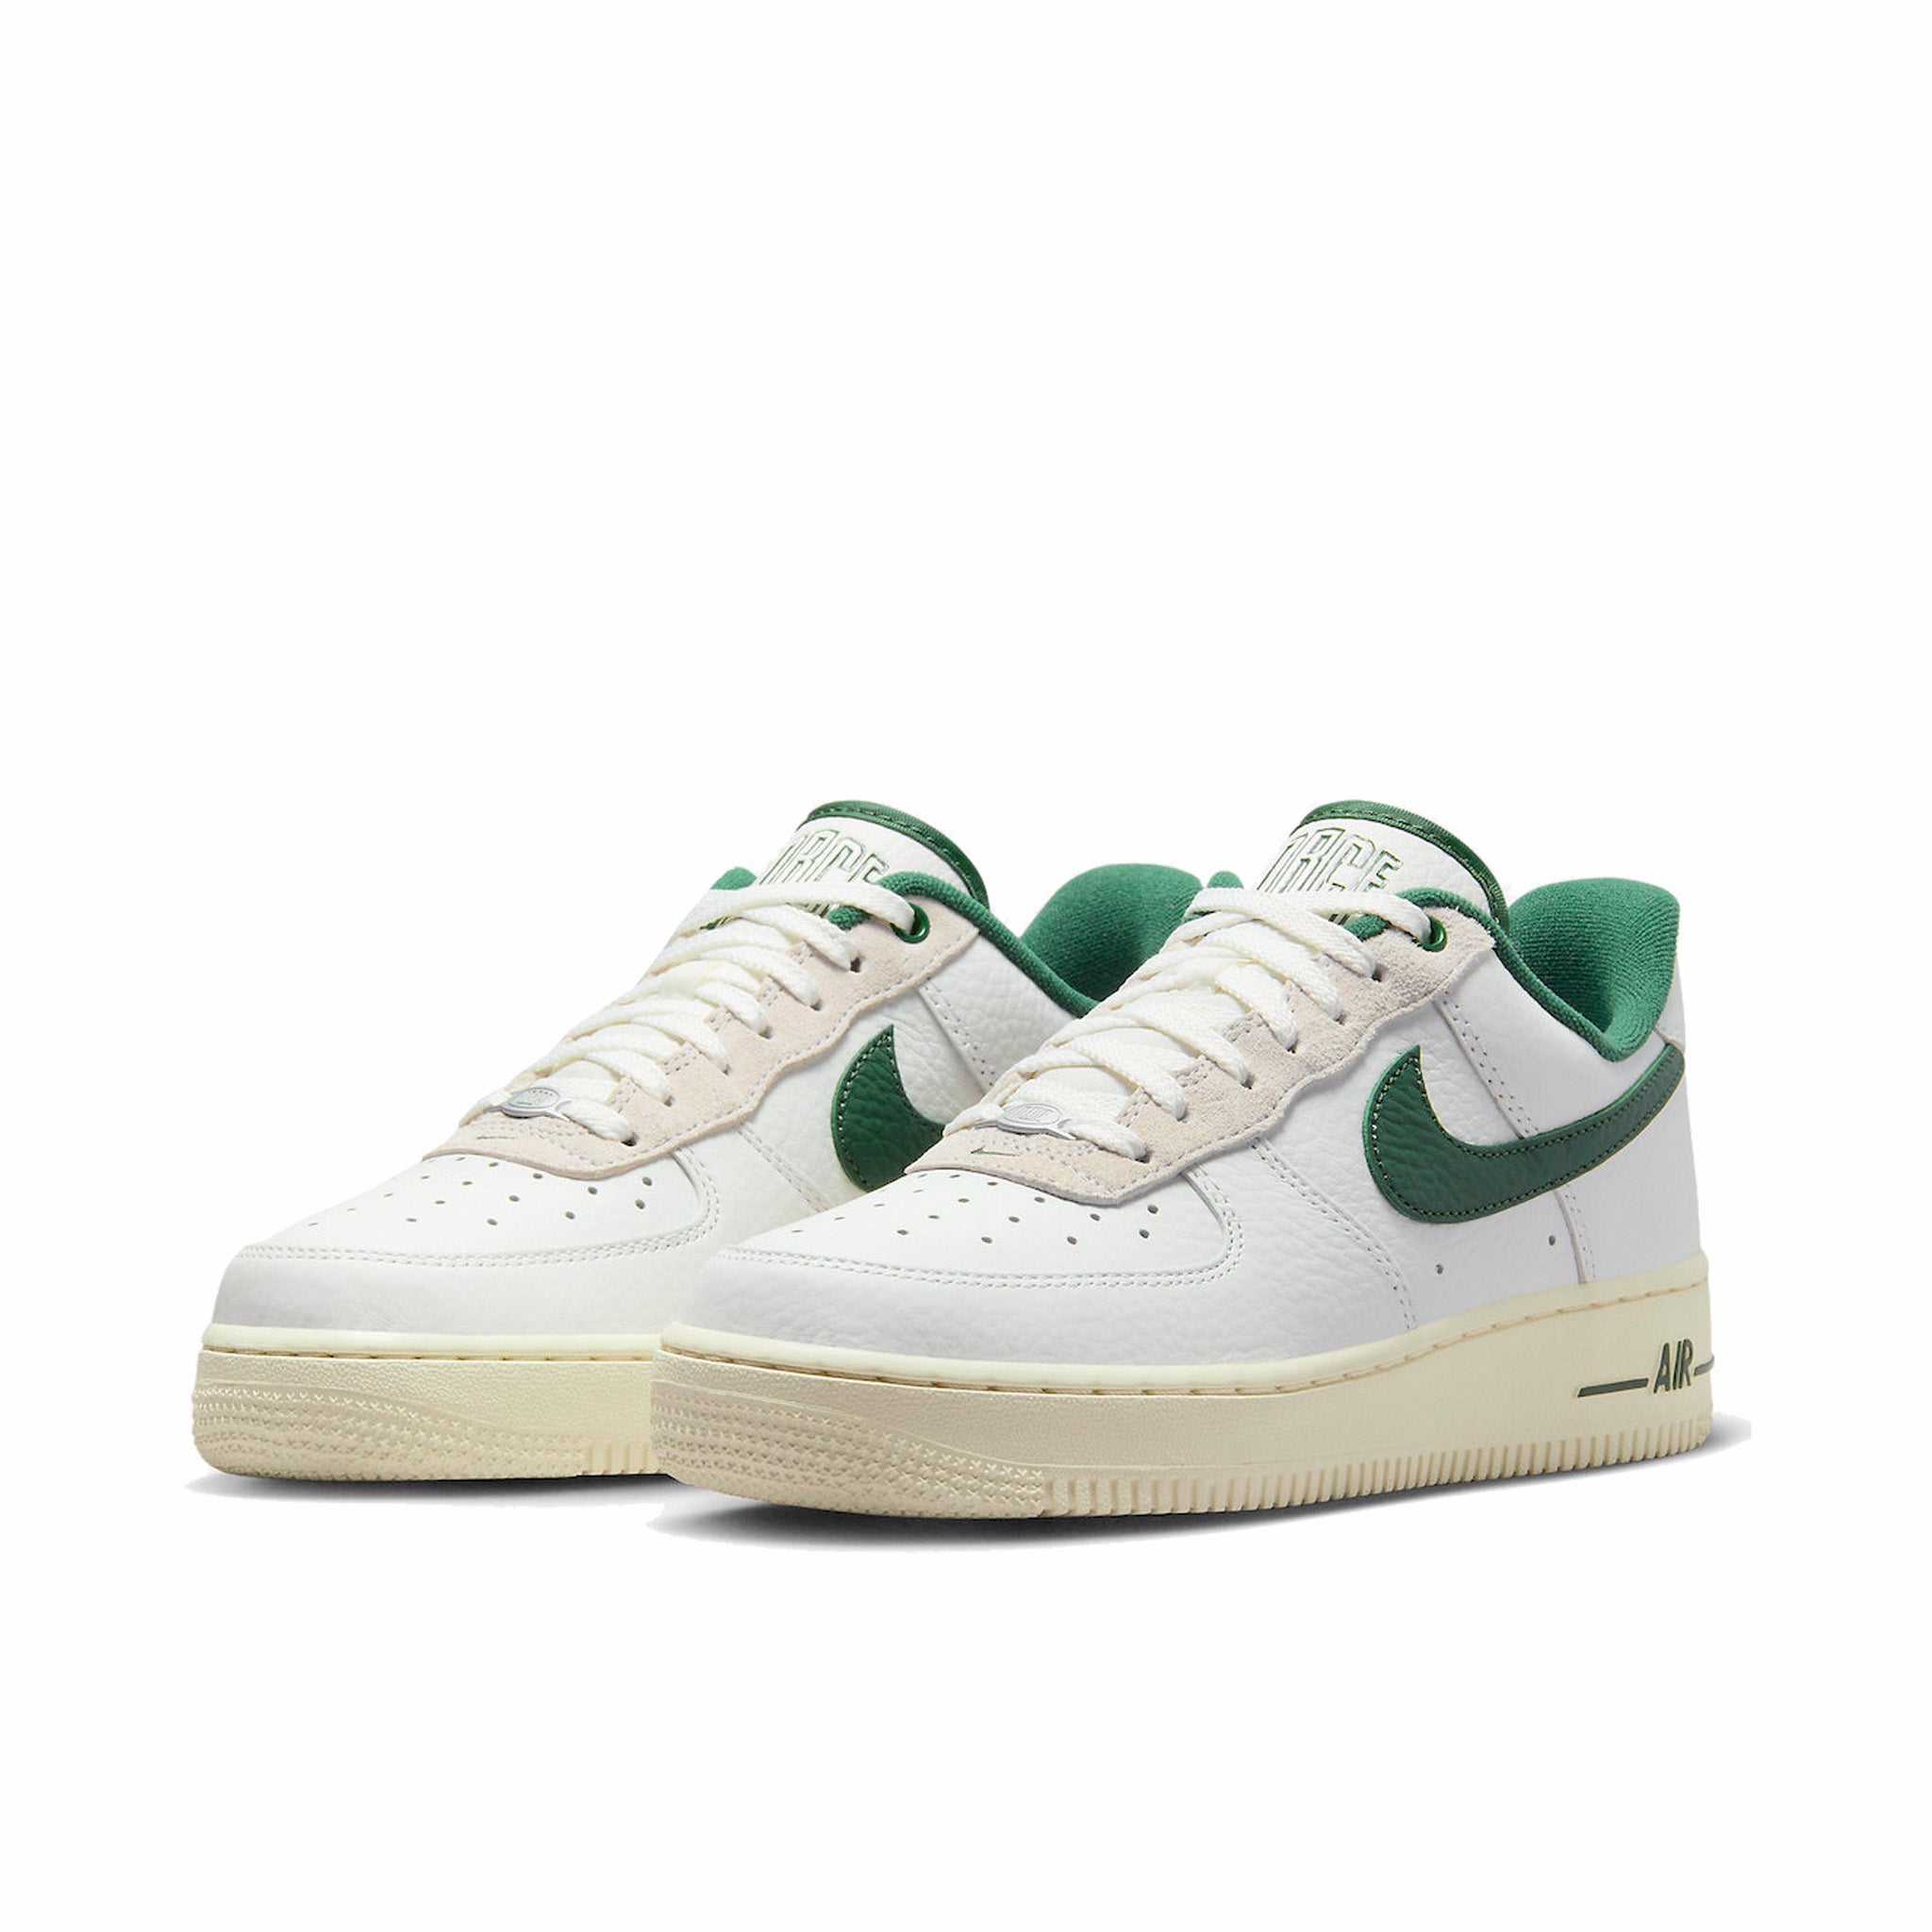 Nike Air Force 1 Low “Command Force” (Summit White/Gorge Green-White) - August Shop